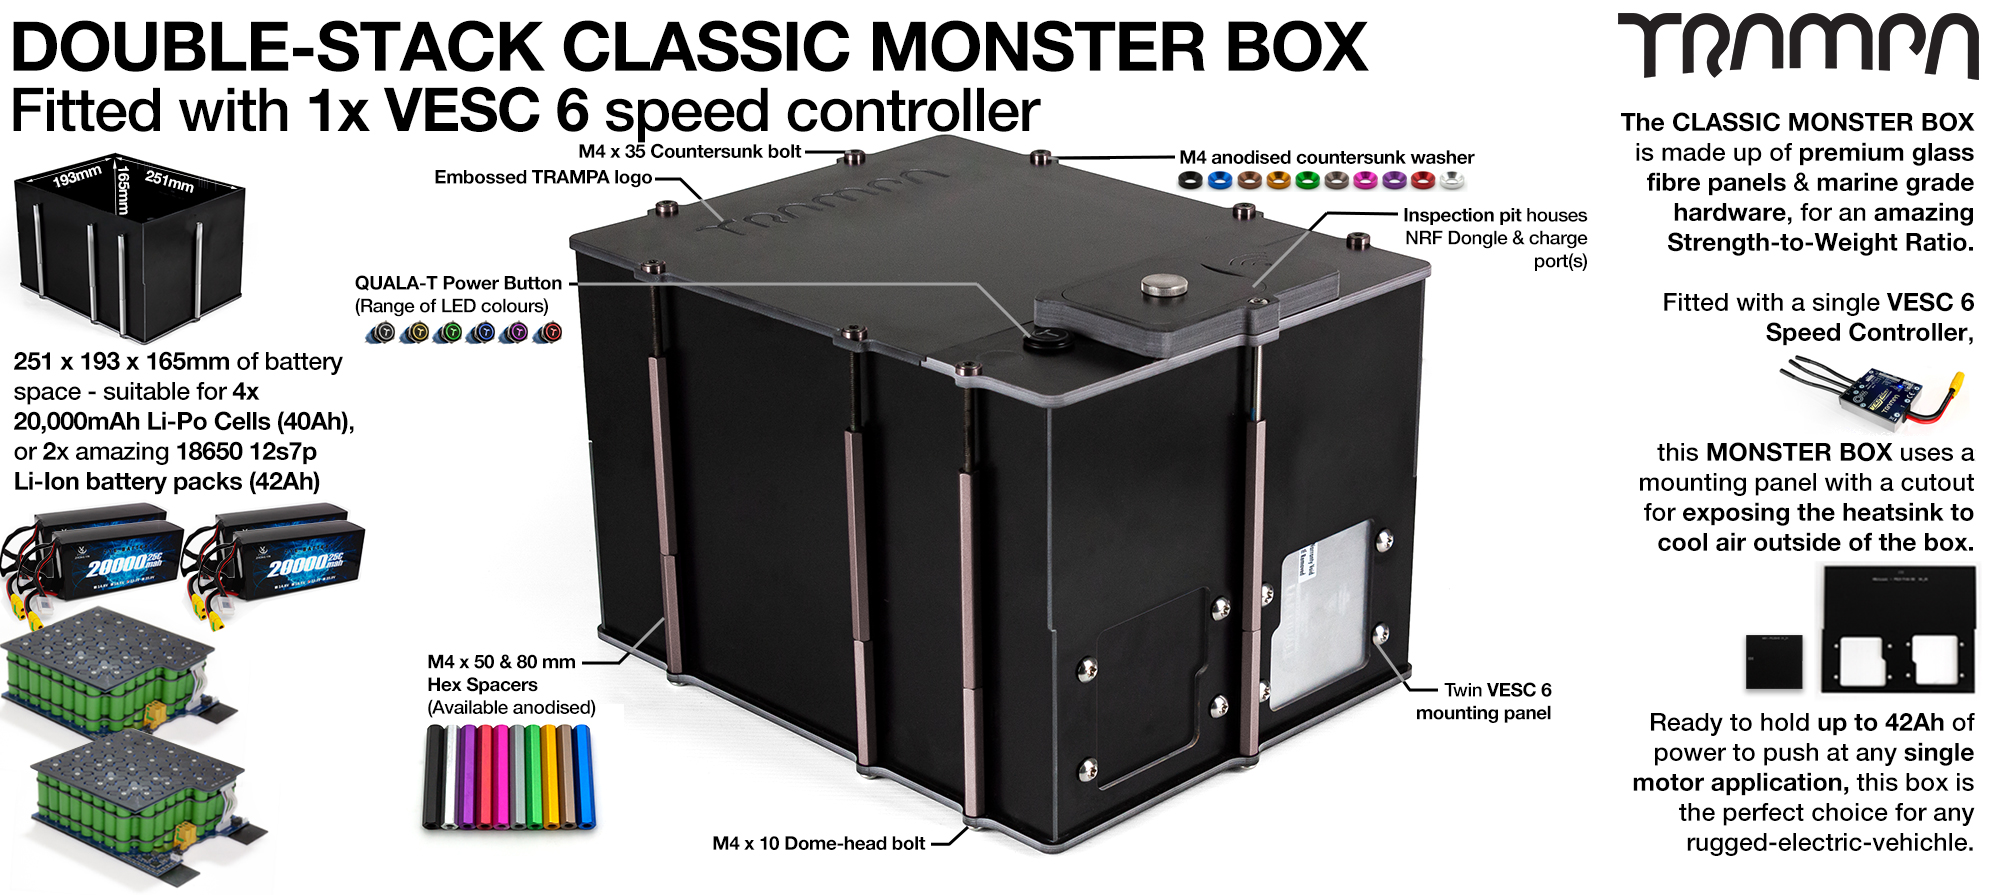 Classic MONSTER Box MkV DOUBLE STACKER supplied with 1x VESC 6 & 1x Externaly Mounted NRF VESC Connect Dongle & Cable 